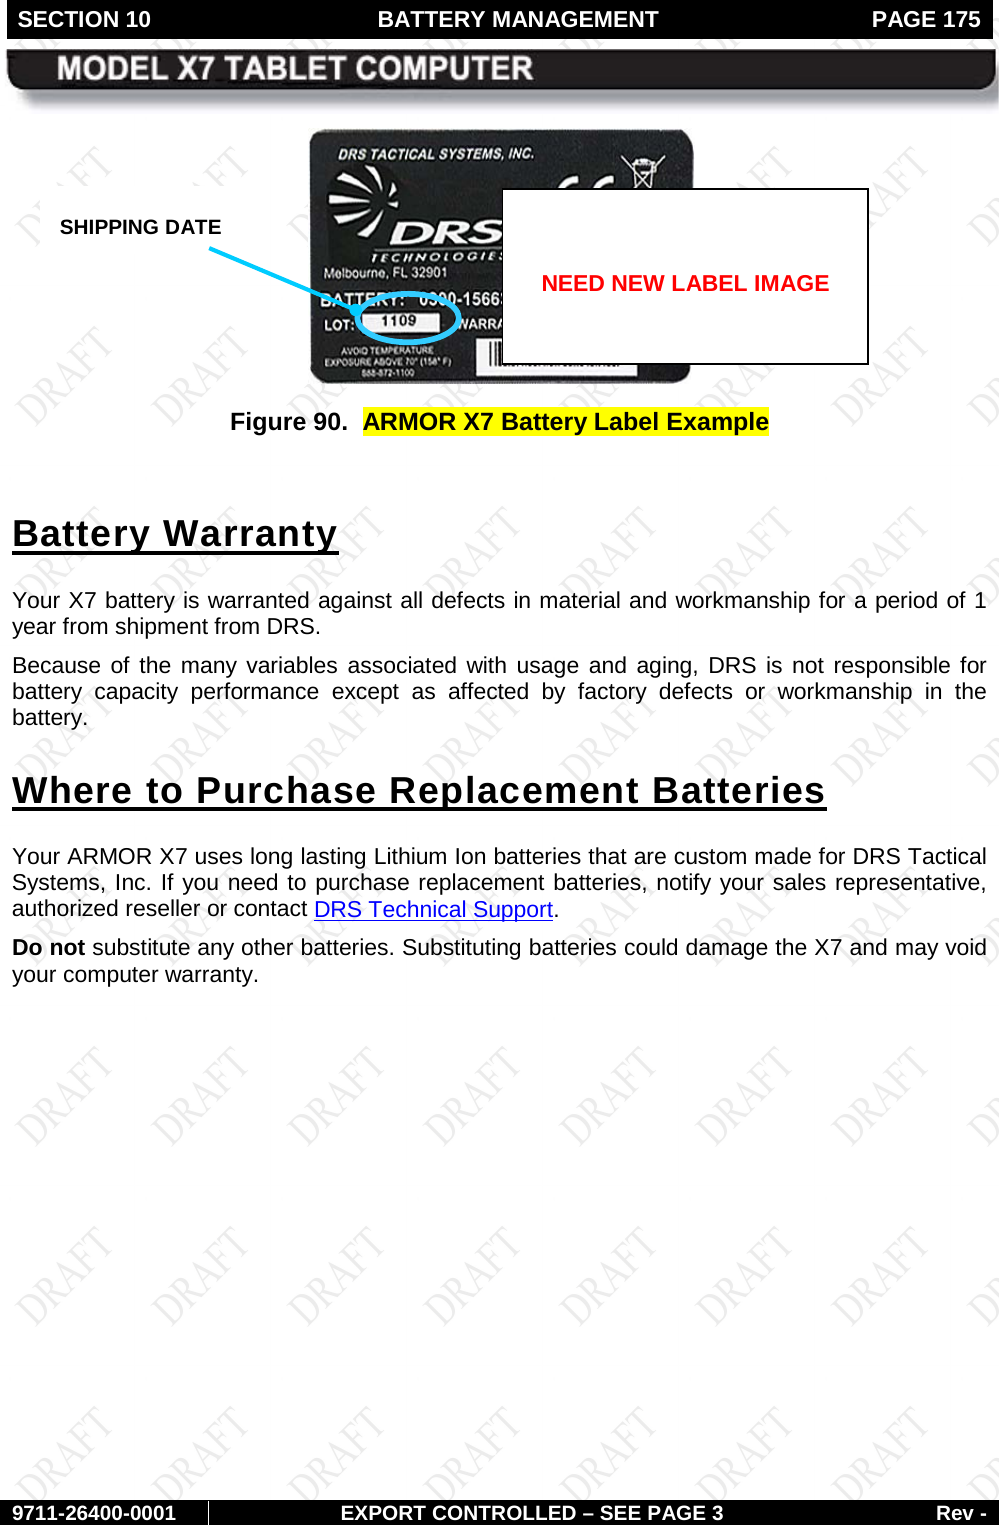 SECTION 10 BATTERY MANAGEMENT  PAGE 175        9711-26400-0001 EXPORT CONTROLLED – SEE PAGE 3 Rev -  Figure 90.  ARMOR X7 Battery Label Example  Battery Warranty Your X7 battery is warranted against all defects in material and workmanship for a period of 1 year from shipment from DRS.  Because of the many variables associated with usage and aging, DRS is not responsible for battery capacity performance except as affected by factory defects or workmanship in the battery.  Where to Purchase Replacement Batteries Your ARMOR X7 uses long lasting Lithium Ion batteries that are custom made for DRS Tactical Systems, Inc. If you need to purchase replacement batteries, notify your sales representative, authorized reseller or contact DRS Technical Support.  Do not substitute any other batteries. Substituting batteries could damage the X7 and may void your computer warranty.    SHIPPING DATE   NEED NEW LABEL IMAGE 